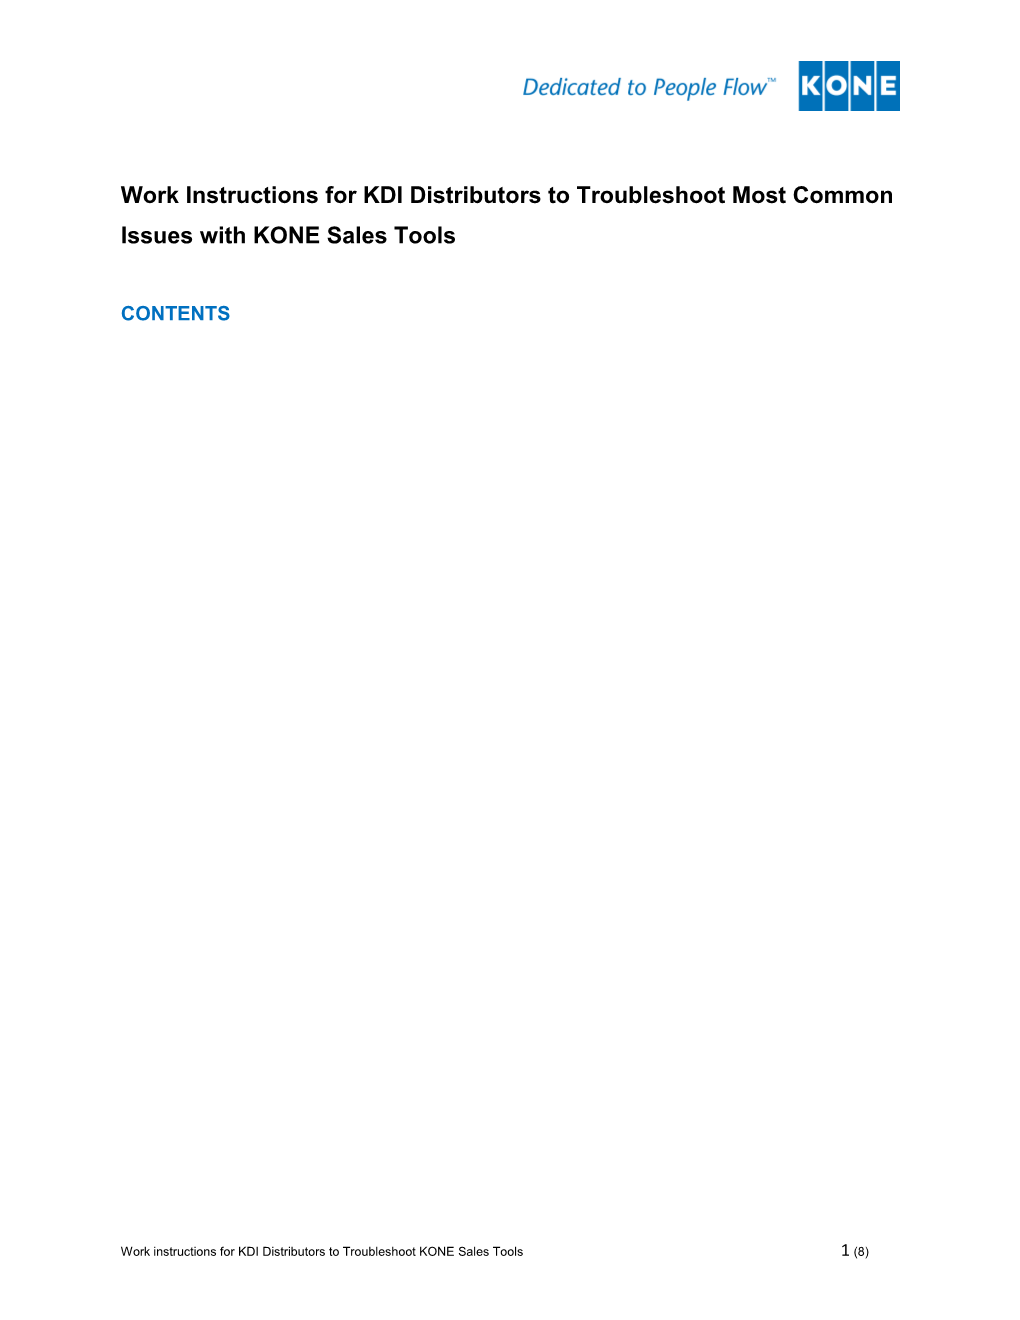 Work Instructions for KDI Distributors to Troubleshoot Most Common Issues with KONE Sales